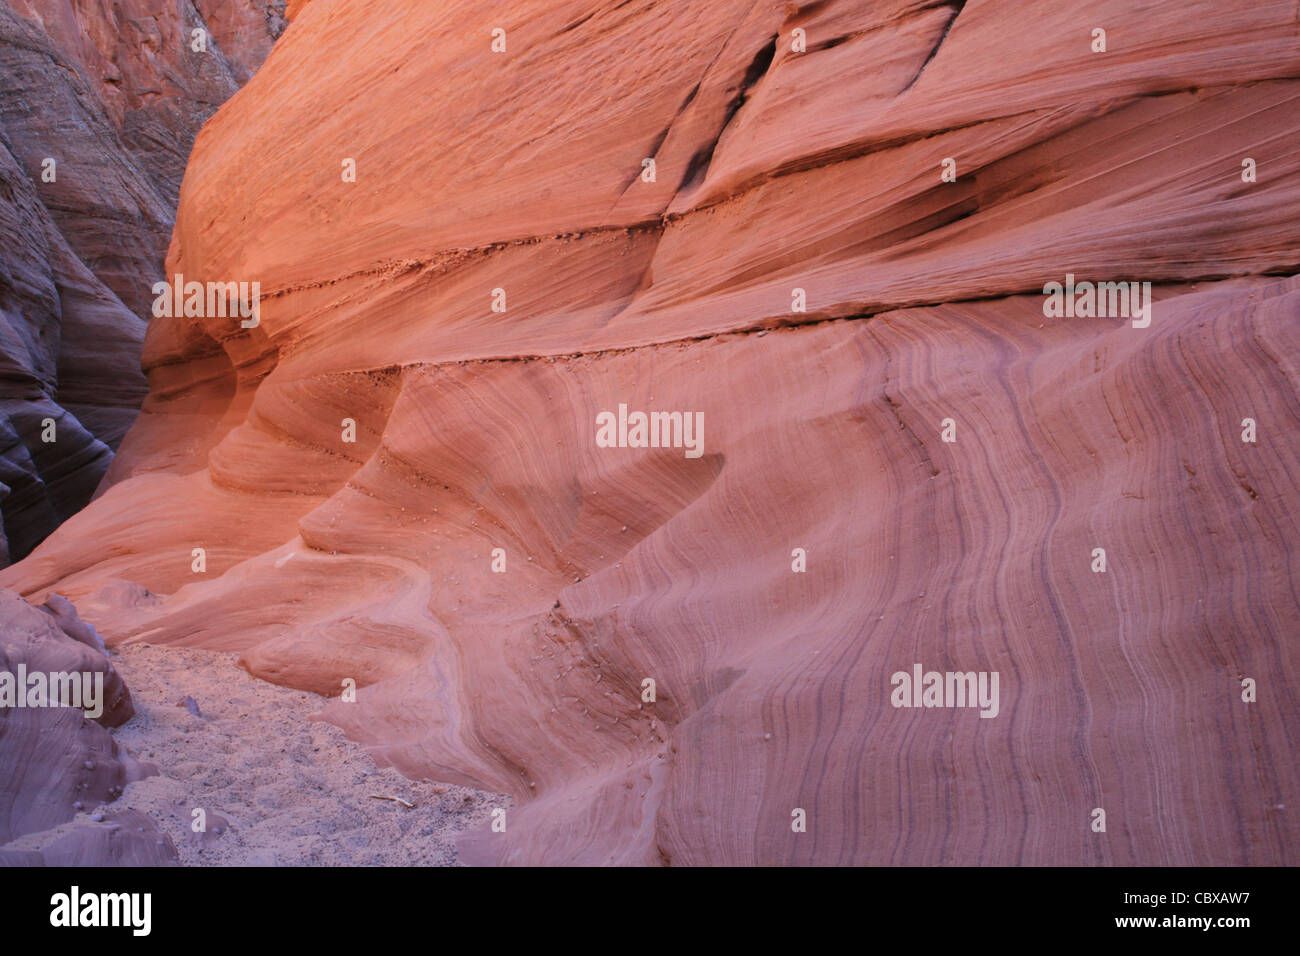 sandstone slot canyon showing cross bedding and erosional curves Stock Photo